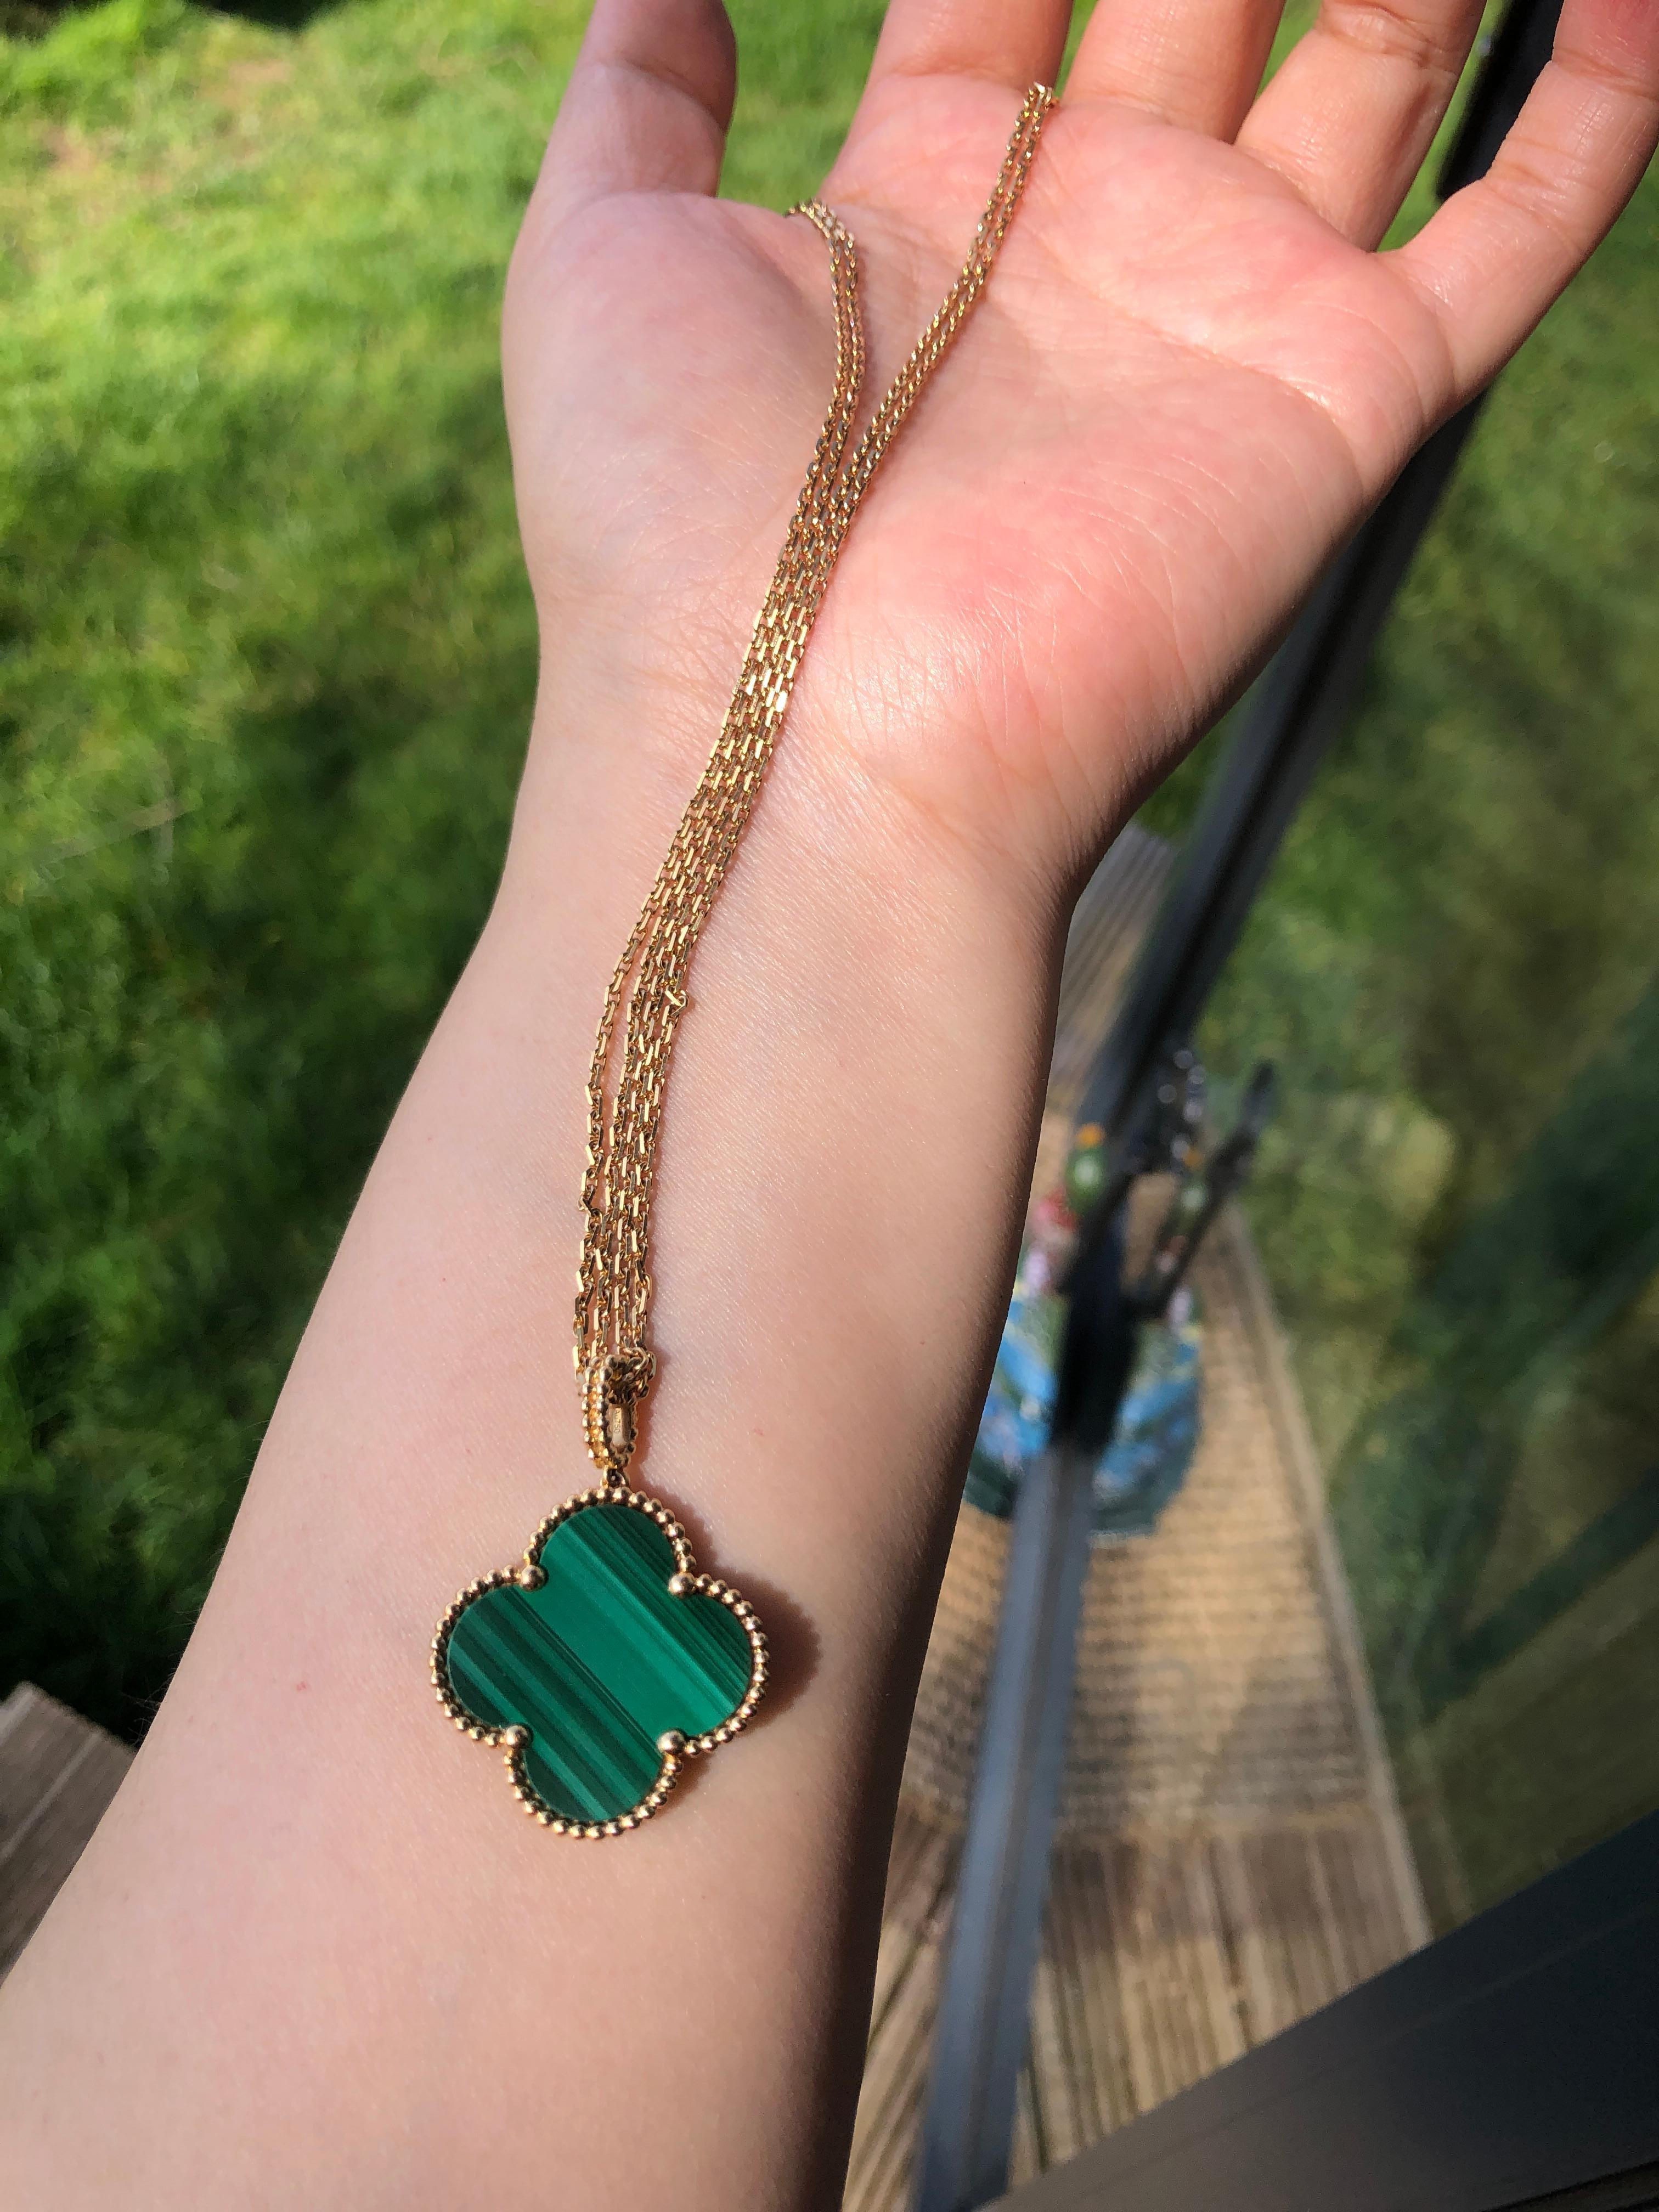 Gorgeous authentic rare and highly collectible Van Cleef & Arpels Magic Alhambra Malachite pendant necklace made in 2016. This piece comes with an original pouch and authentic card.

STONES
Malachite

METAL TYPE 
18K Yellow Gold

WEIGHT
Appro: